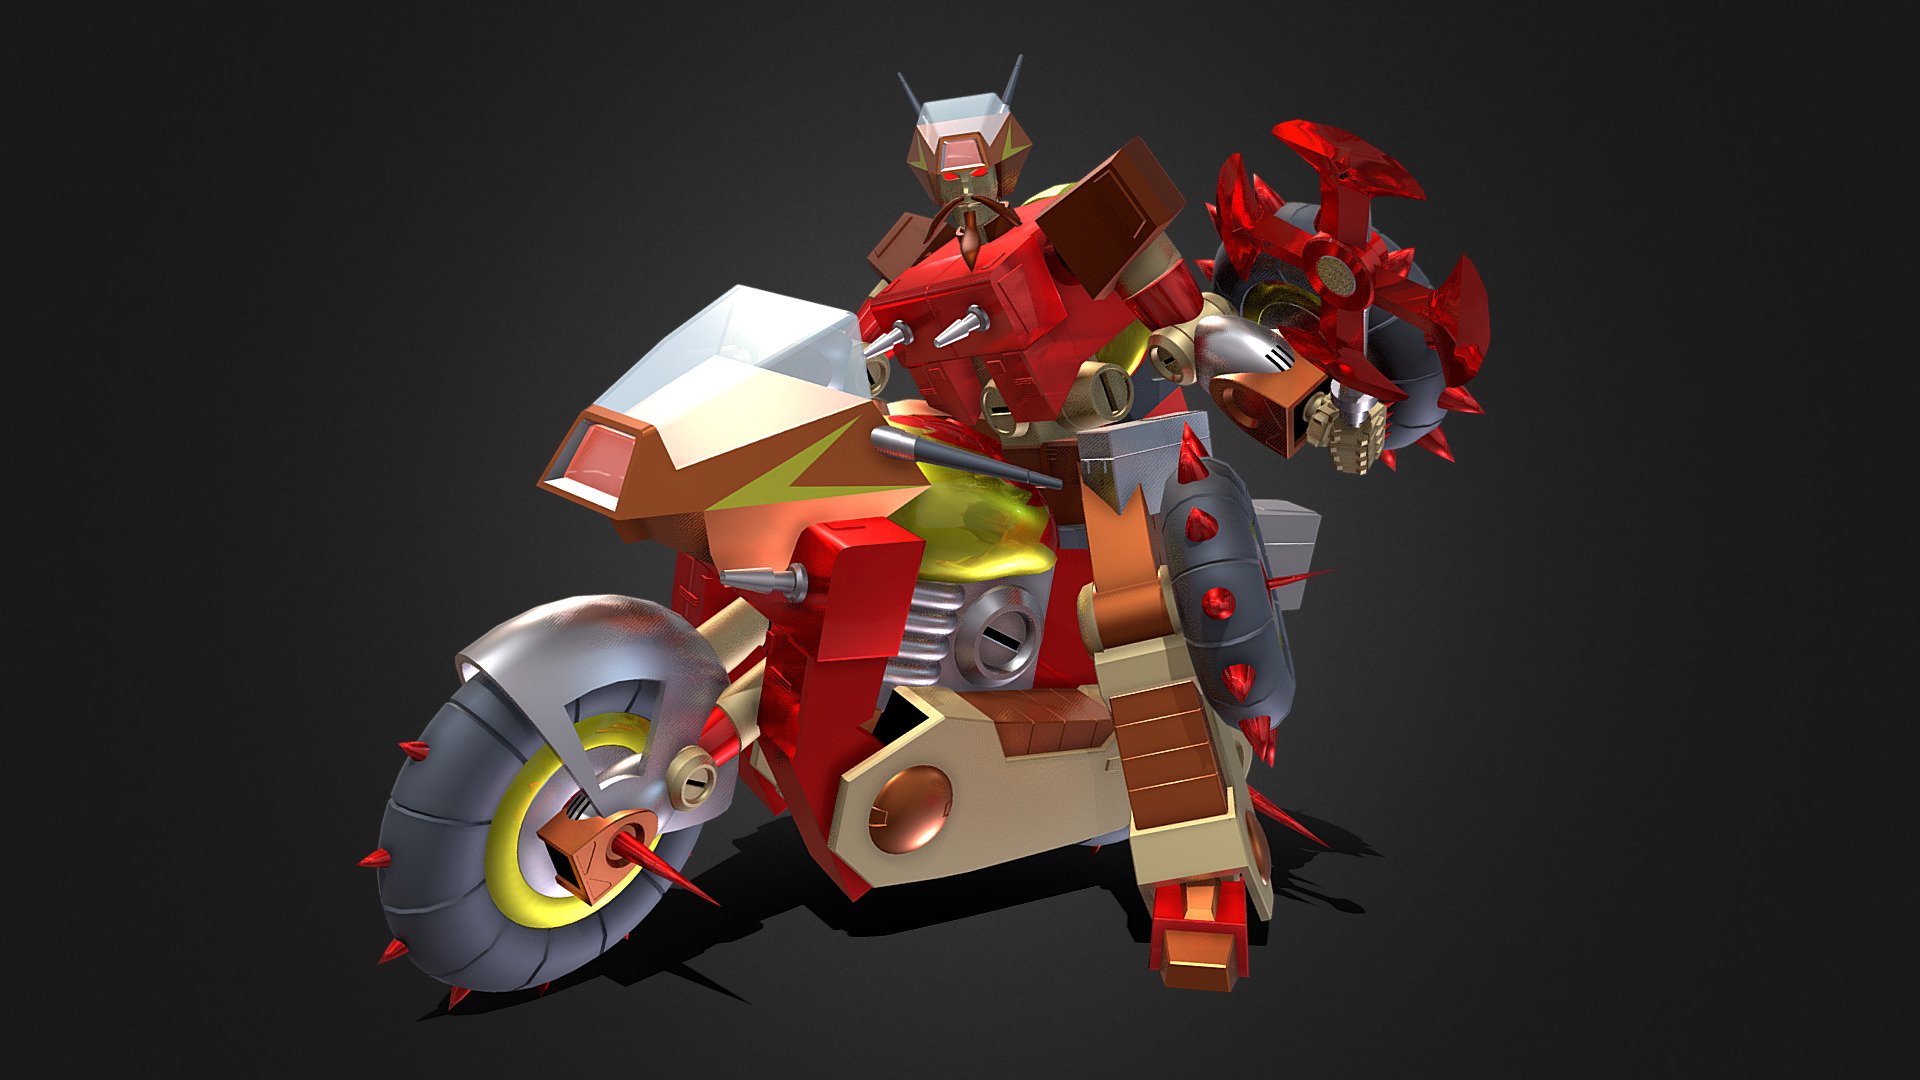 If you're interested in purchasing any of my models, contact me @ andrewdisaacs@yahoo.com

Wreck-Gar from Transformers The Movie (1986) and Season 3 of the Generation 1 cartoon. 

Made by myself in 3DS Max 3d model